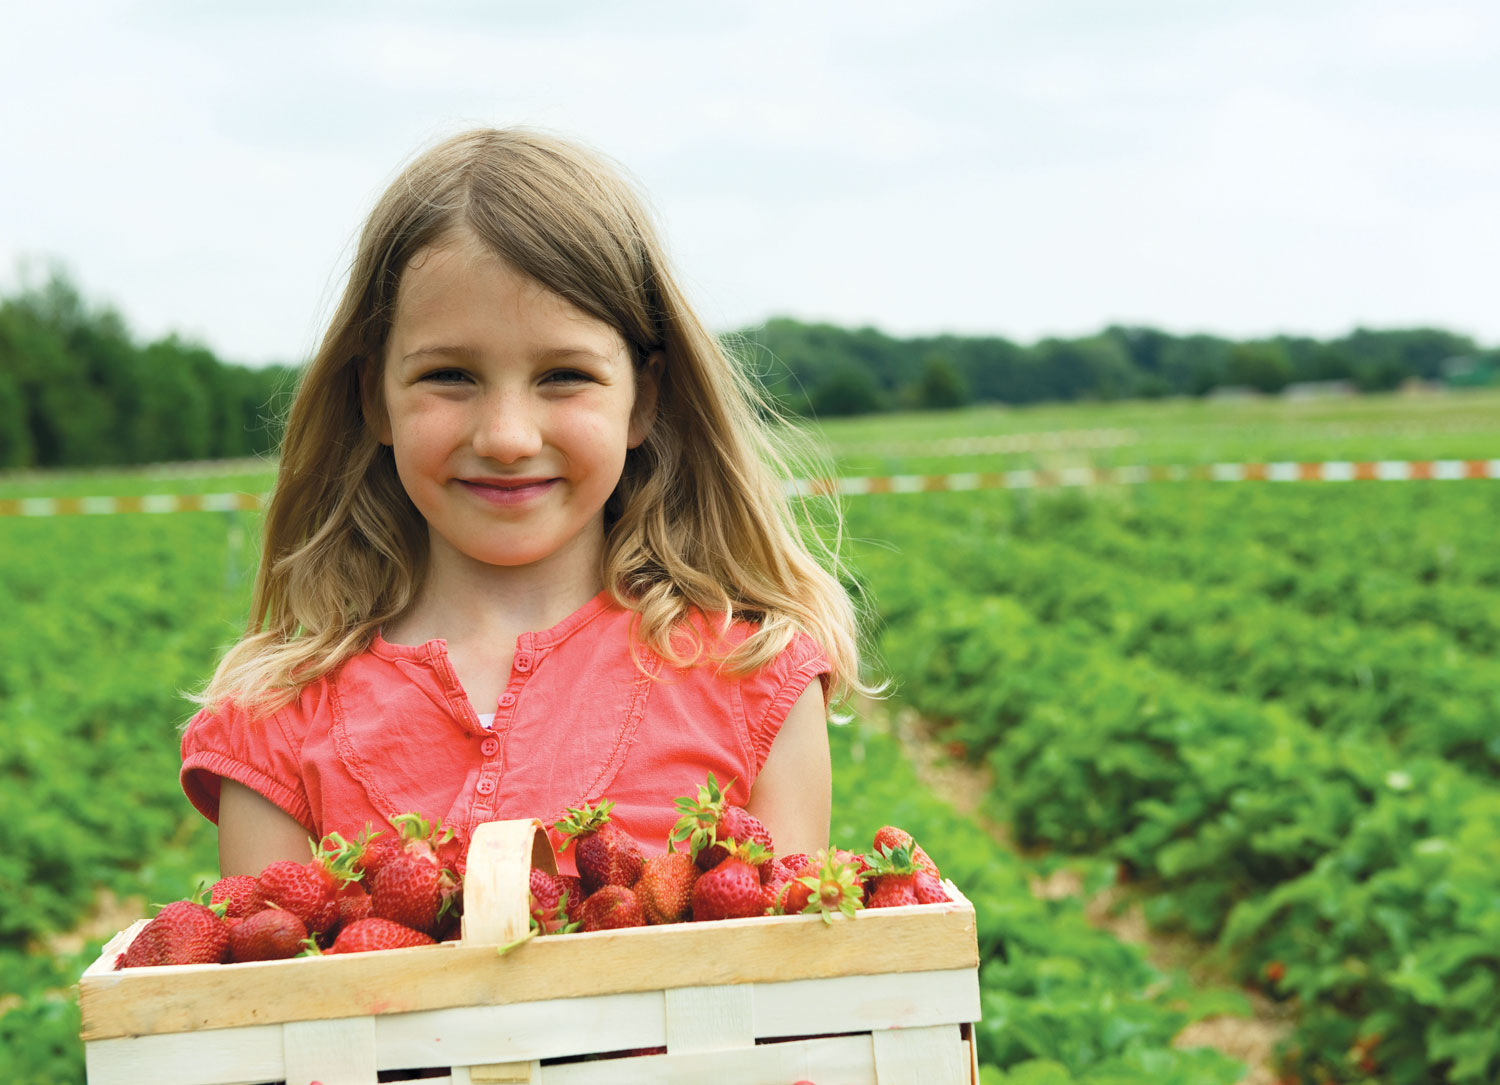 Little girl holding a basket of strawberries